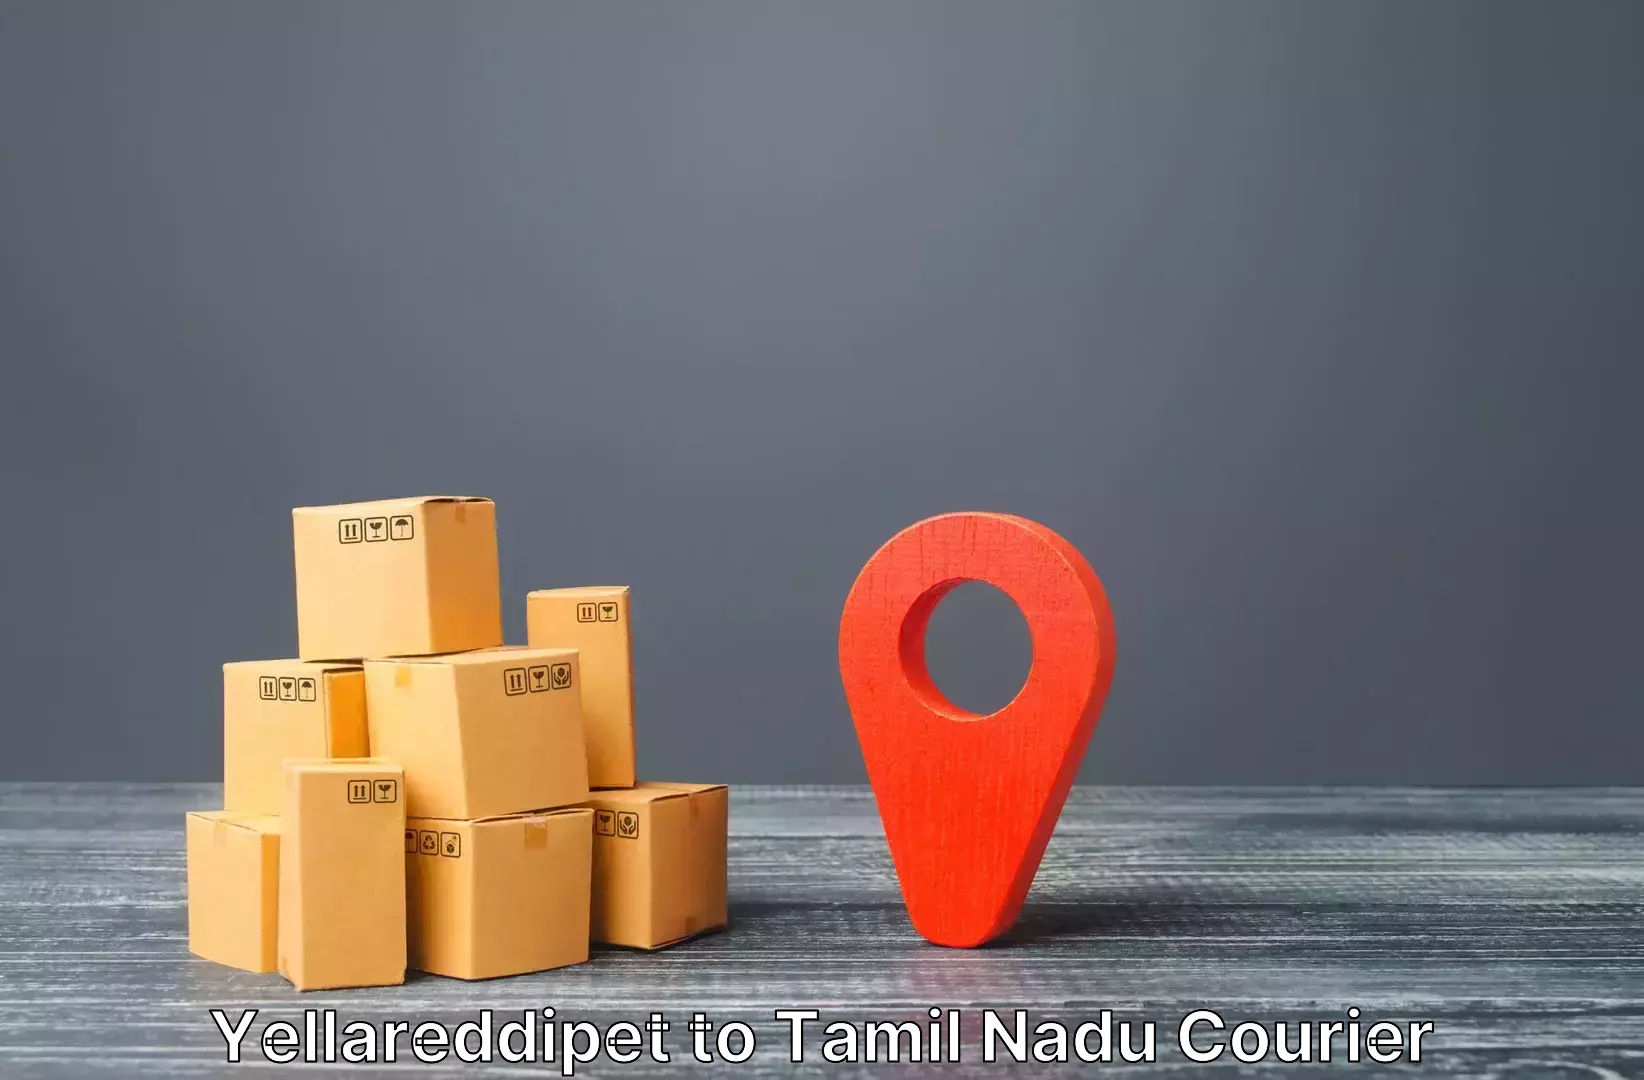 Luggage shipping specialists Yellareddipet to Thisayanvilai